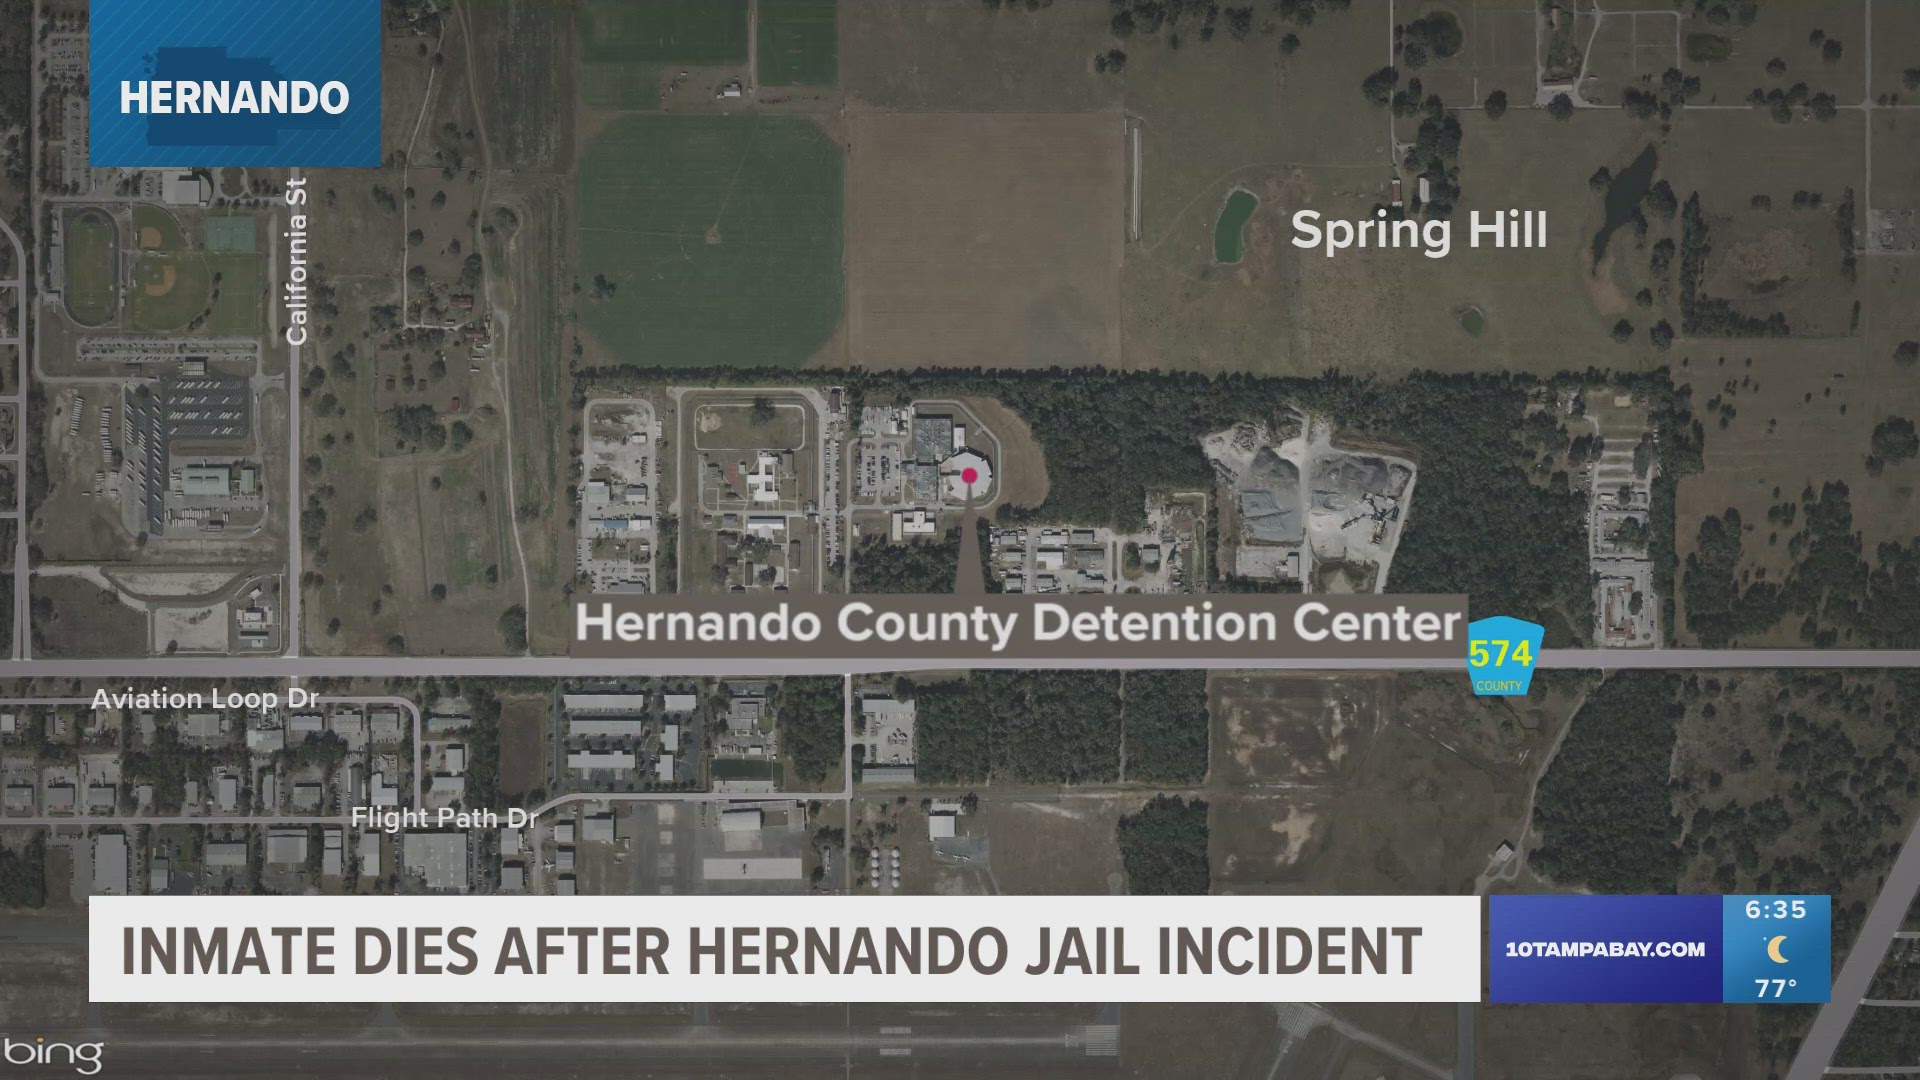 The male inmate died on Saturday. It is unclear what the incident was that landed him in the hospital.